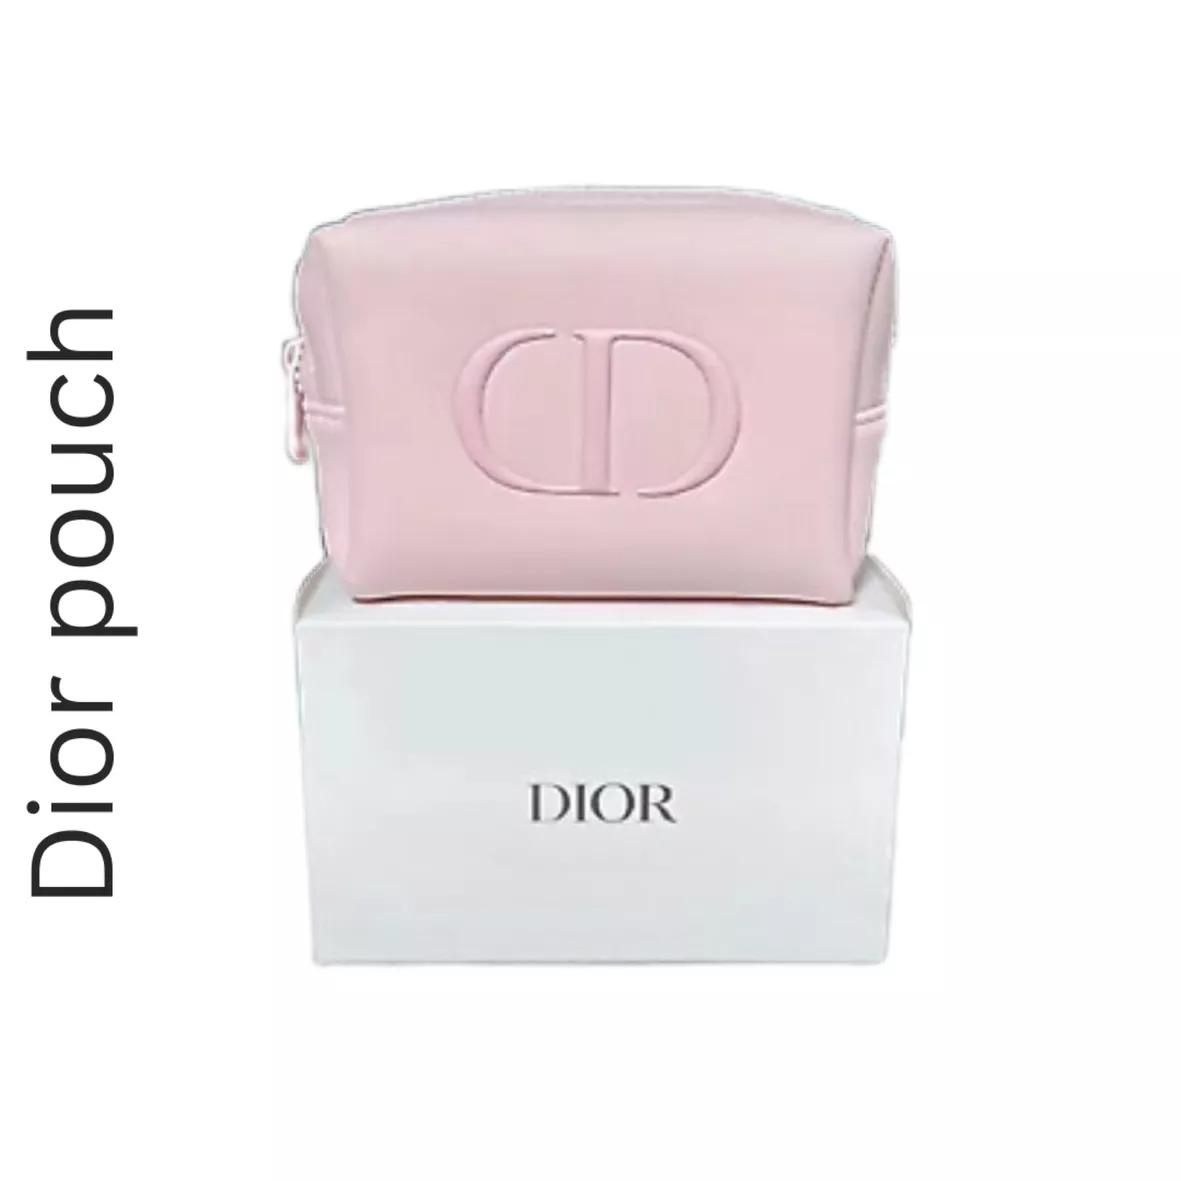 DIOR BEAUTY LIGHT PINK CD LOGO COSMETIC MAKEUP BAG POUCH NEW